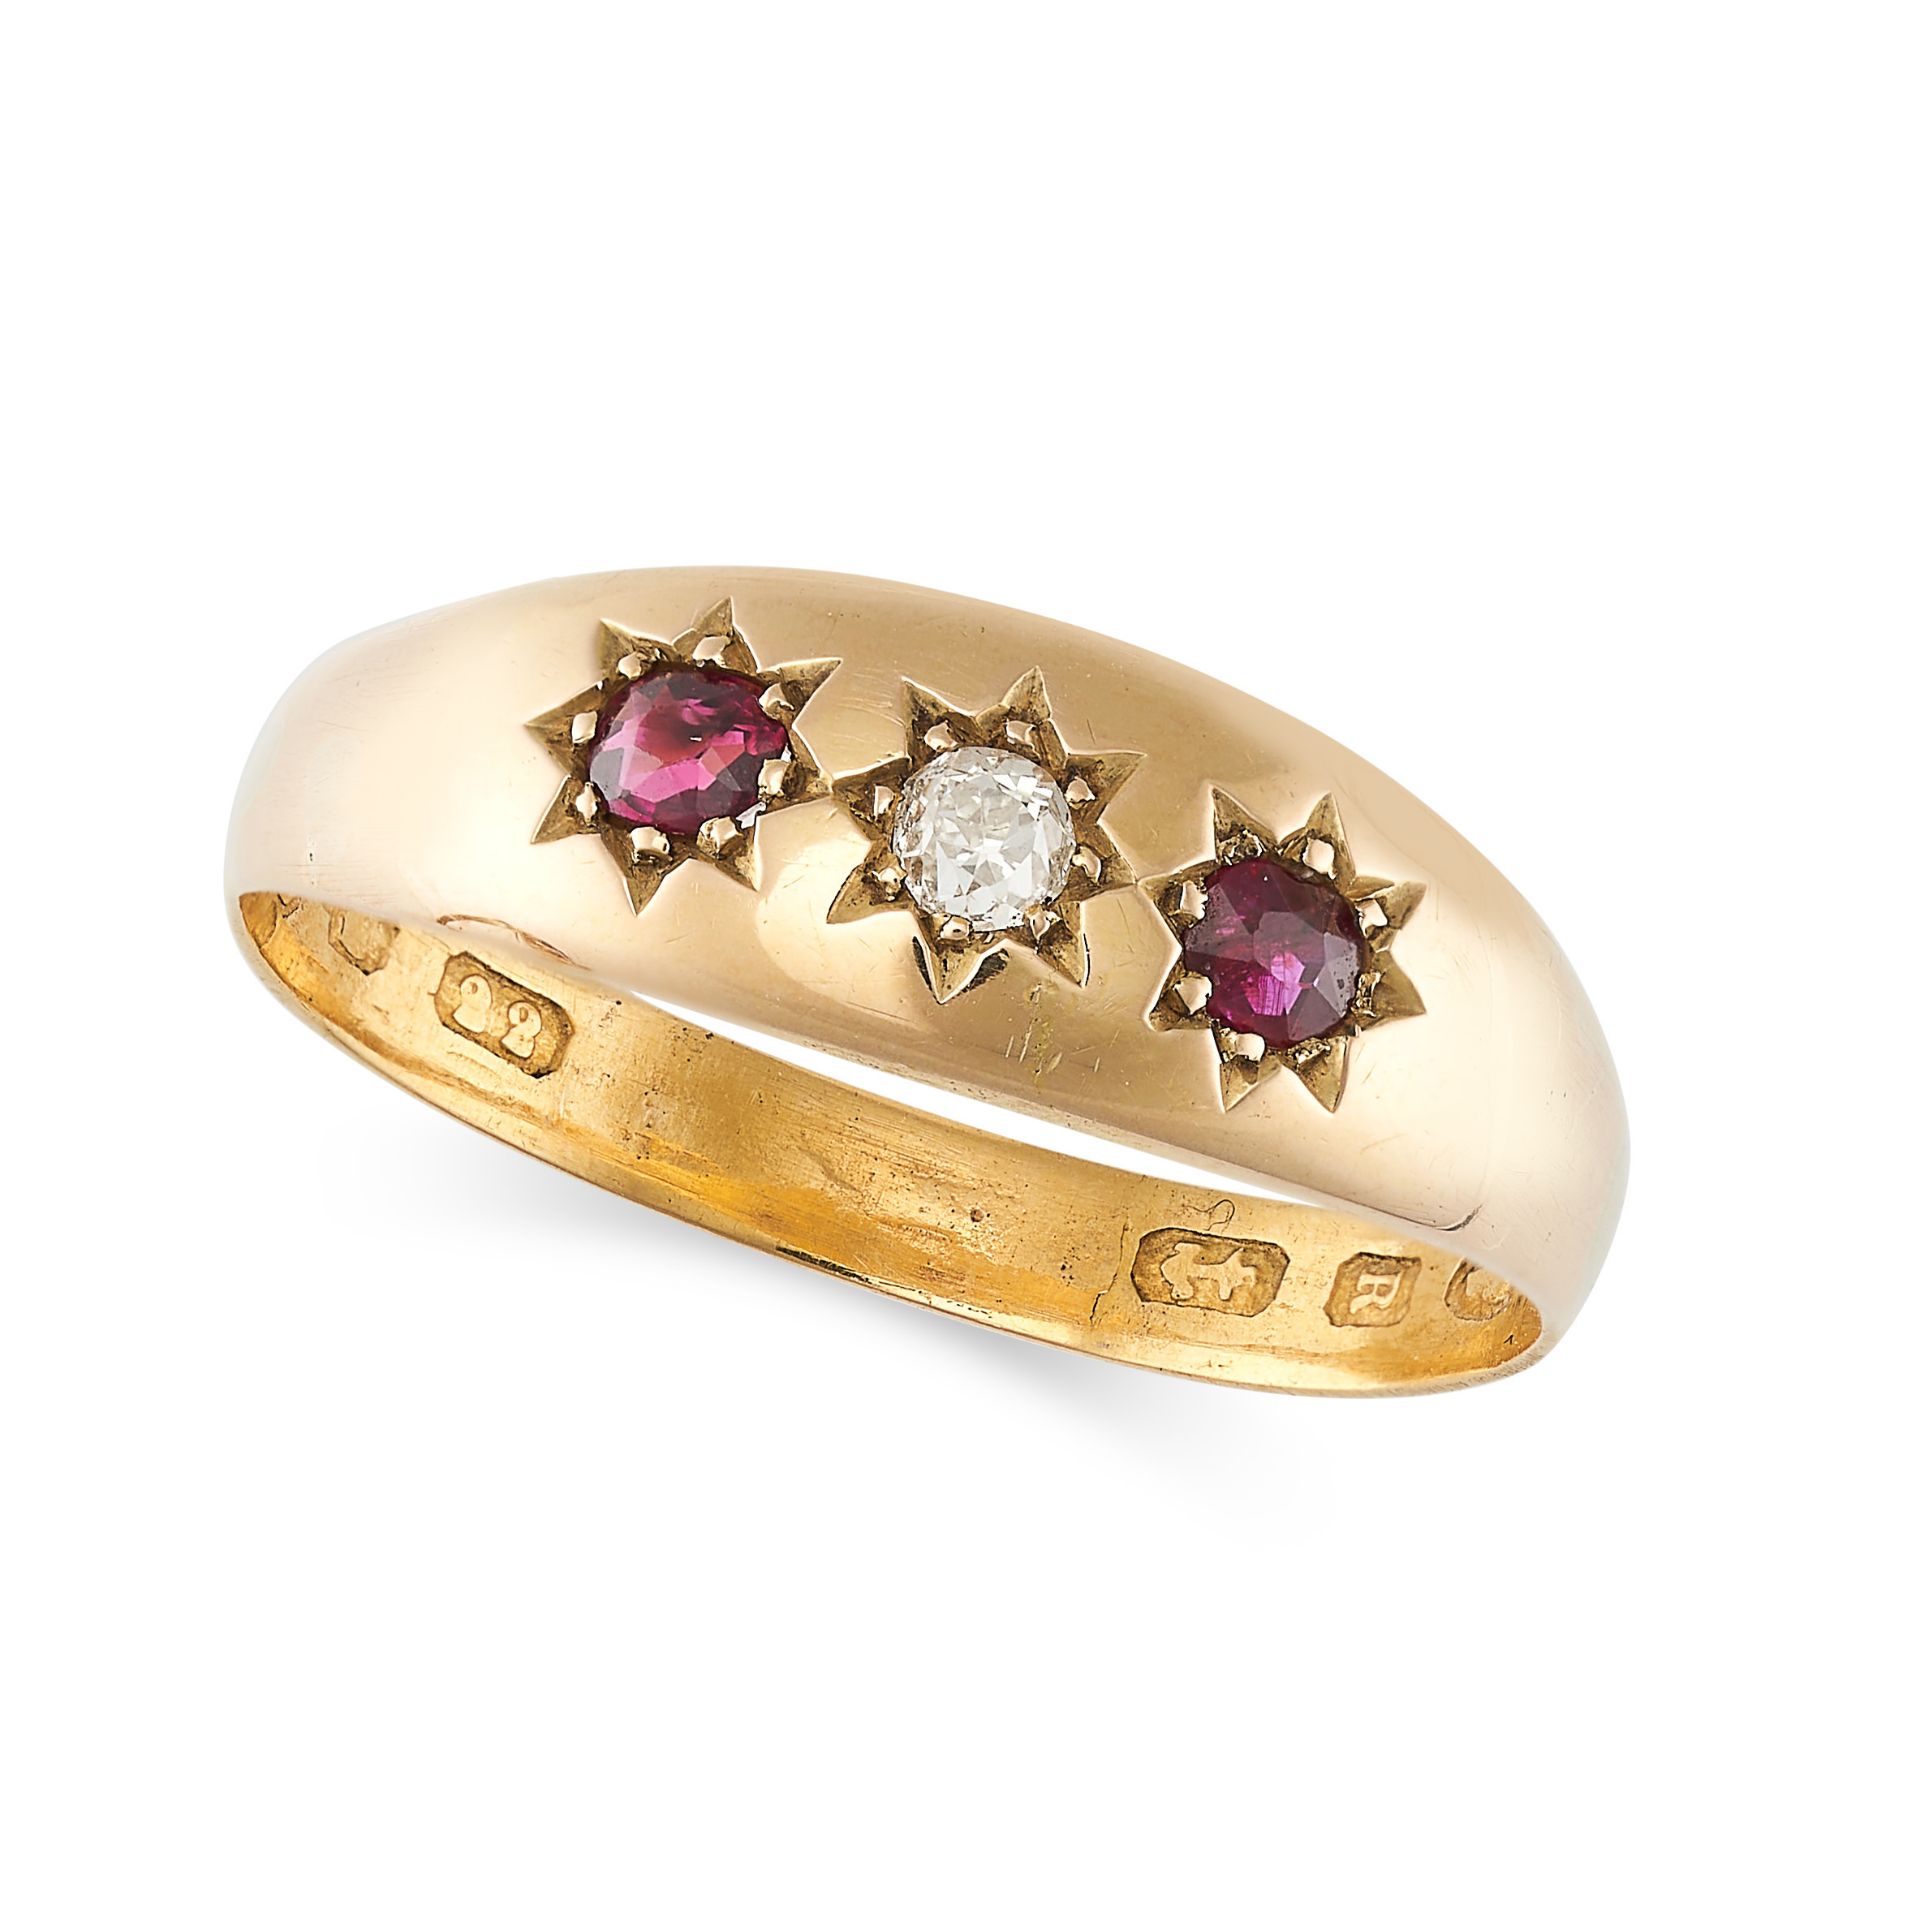 AN ANTIQUE VICTORIAN RUBY AND DIAMOND GYPSY RING in yellow gold, set with an old cut diamond and ...